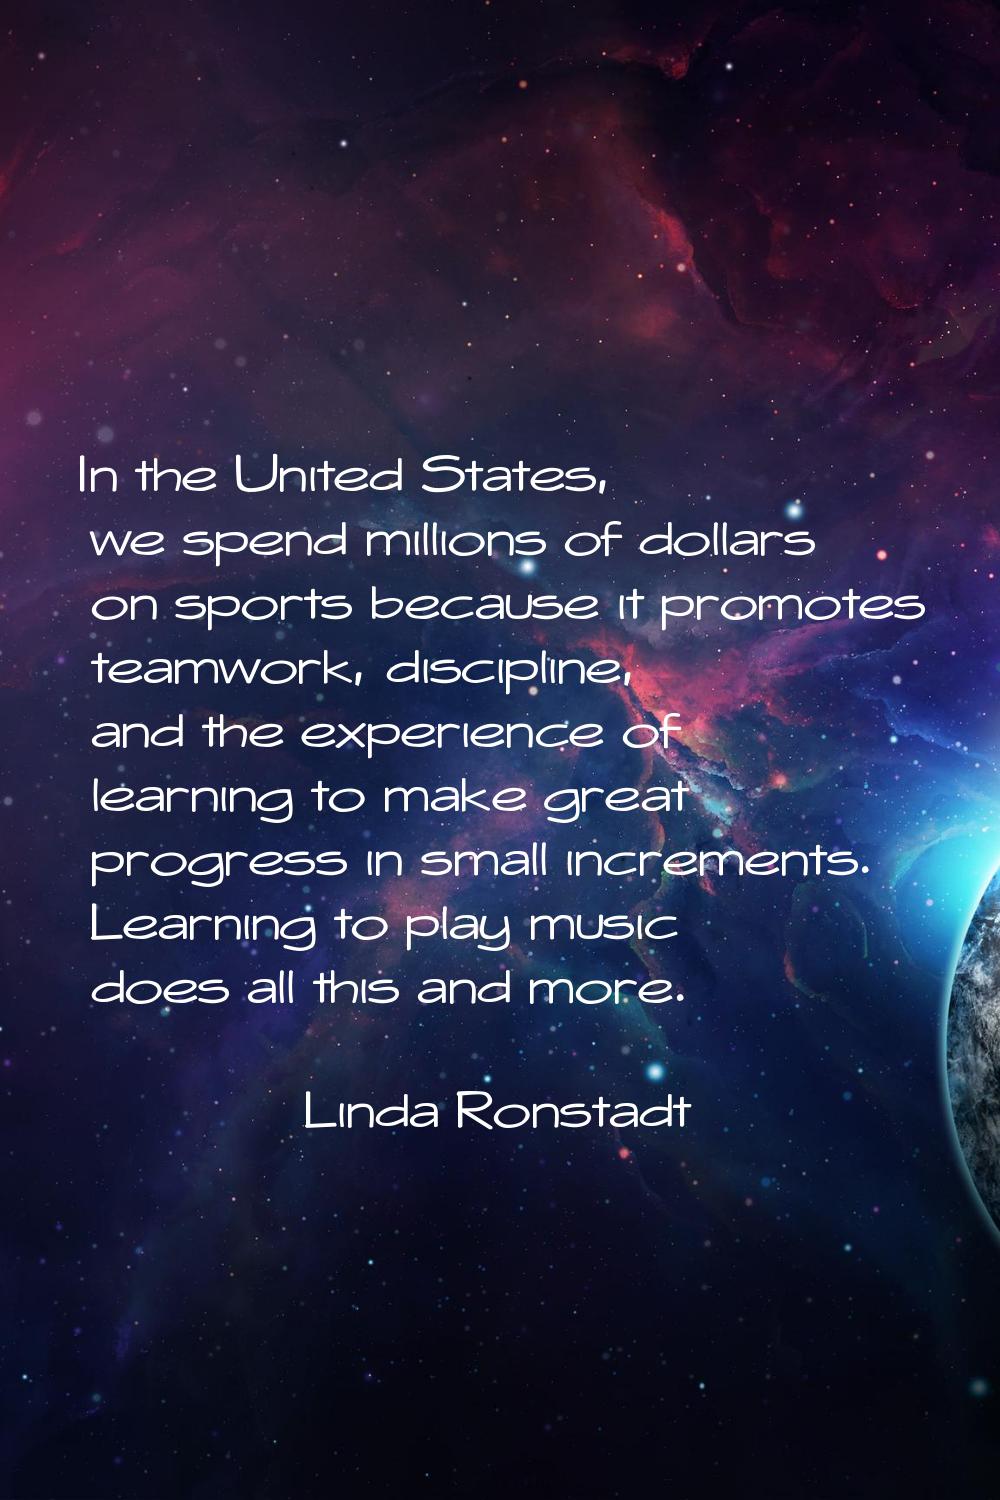 In the United States, we spend millions of dollars on sports because it promotes teamwork, discipli